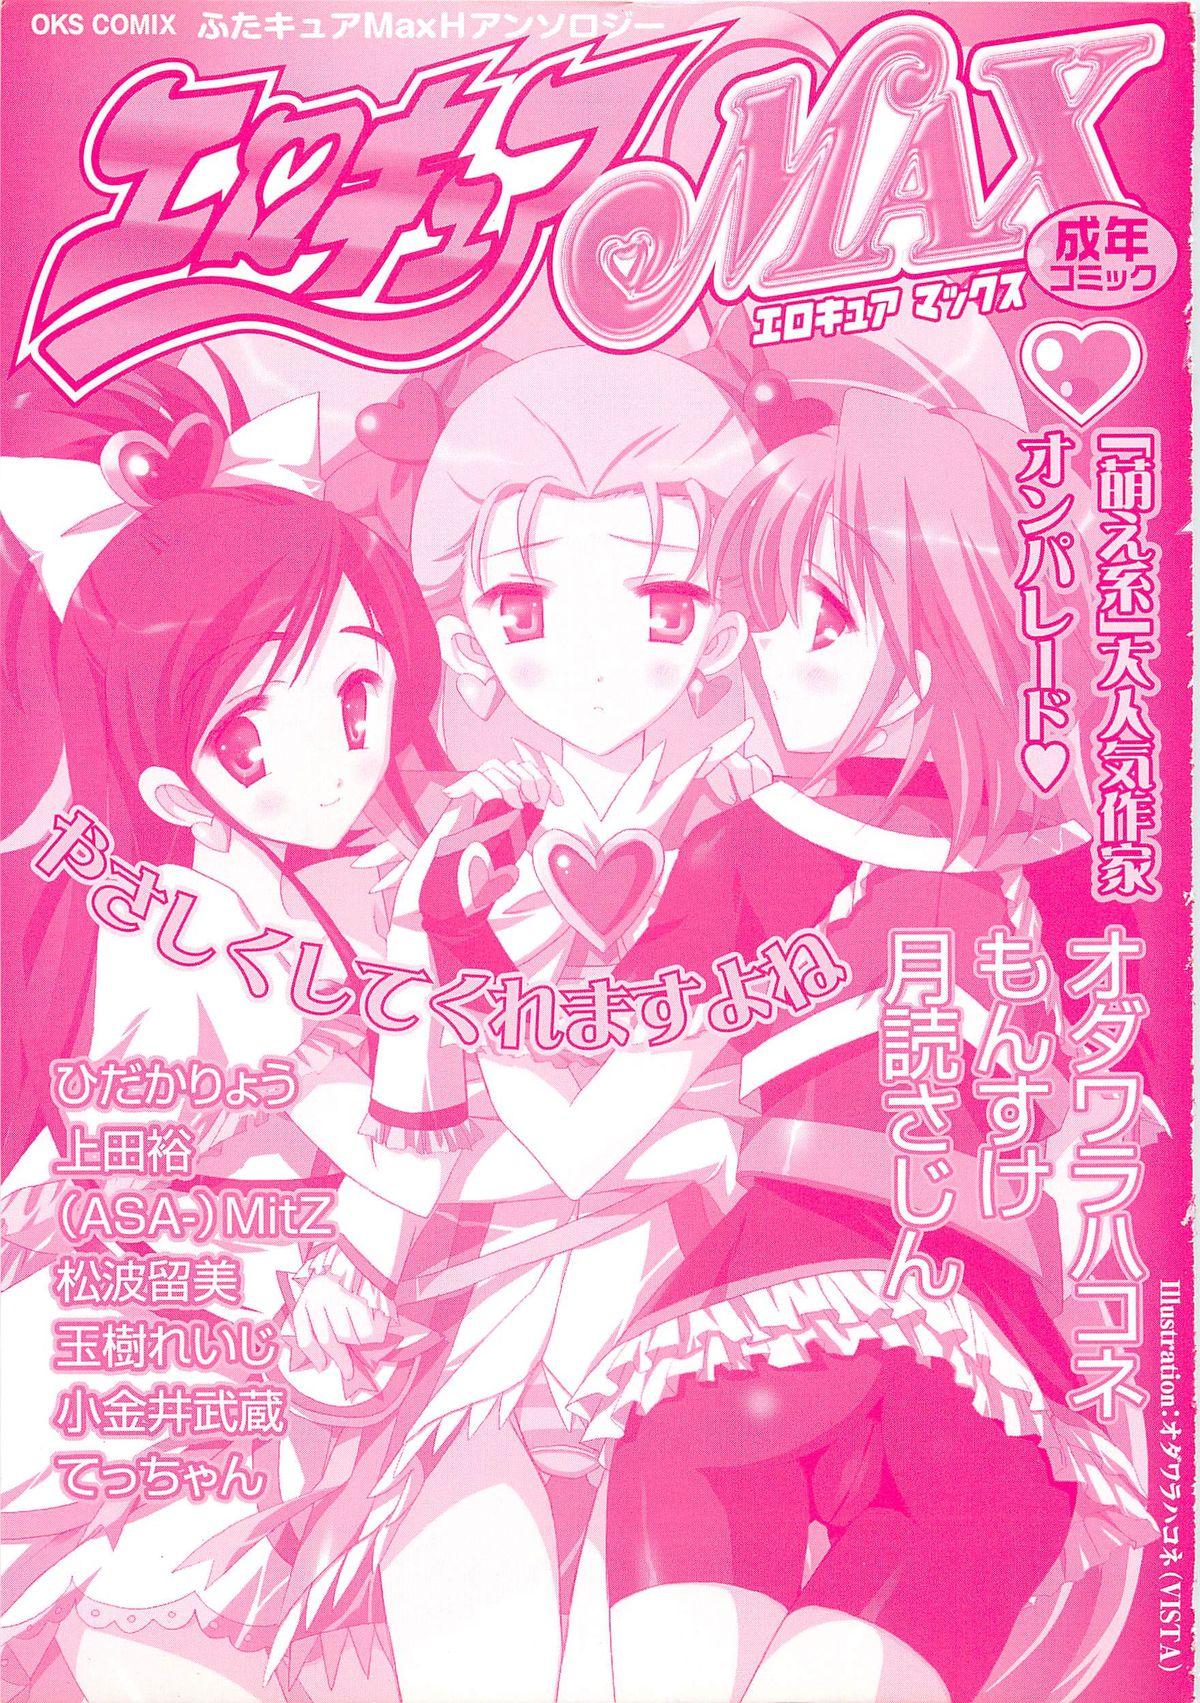 First Time Erocure MAX - Futacure Max H - Pretty cure Thylinh - Page 3